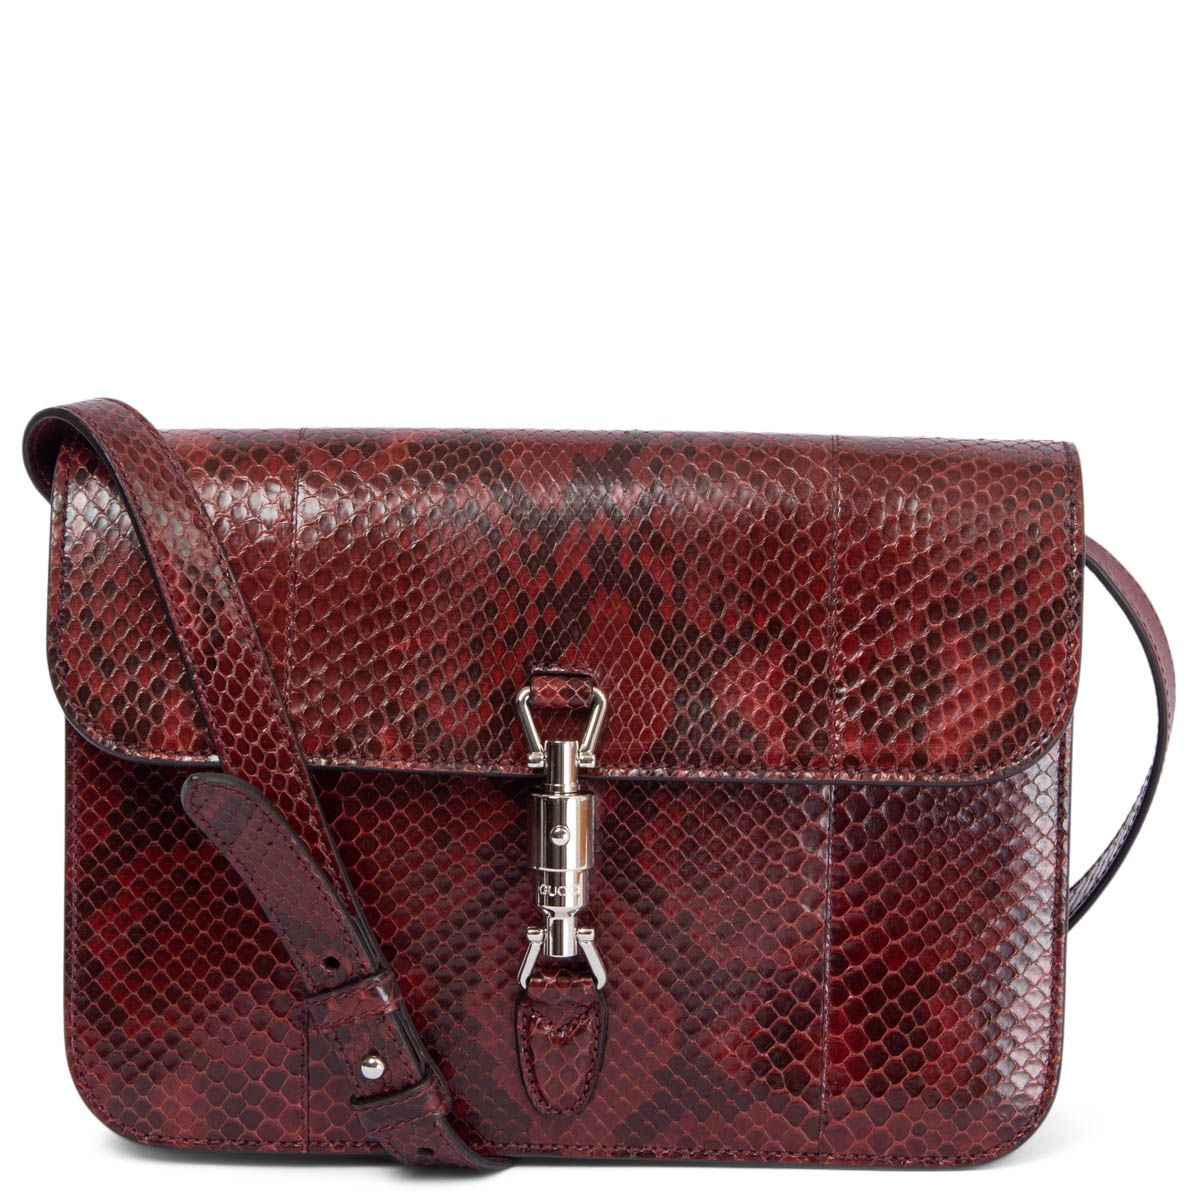 The Soft Box Perforated Crossbody Bag